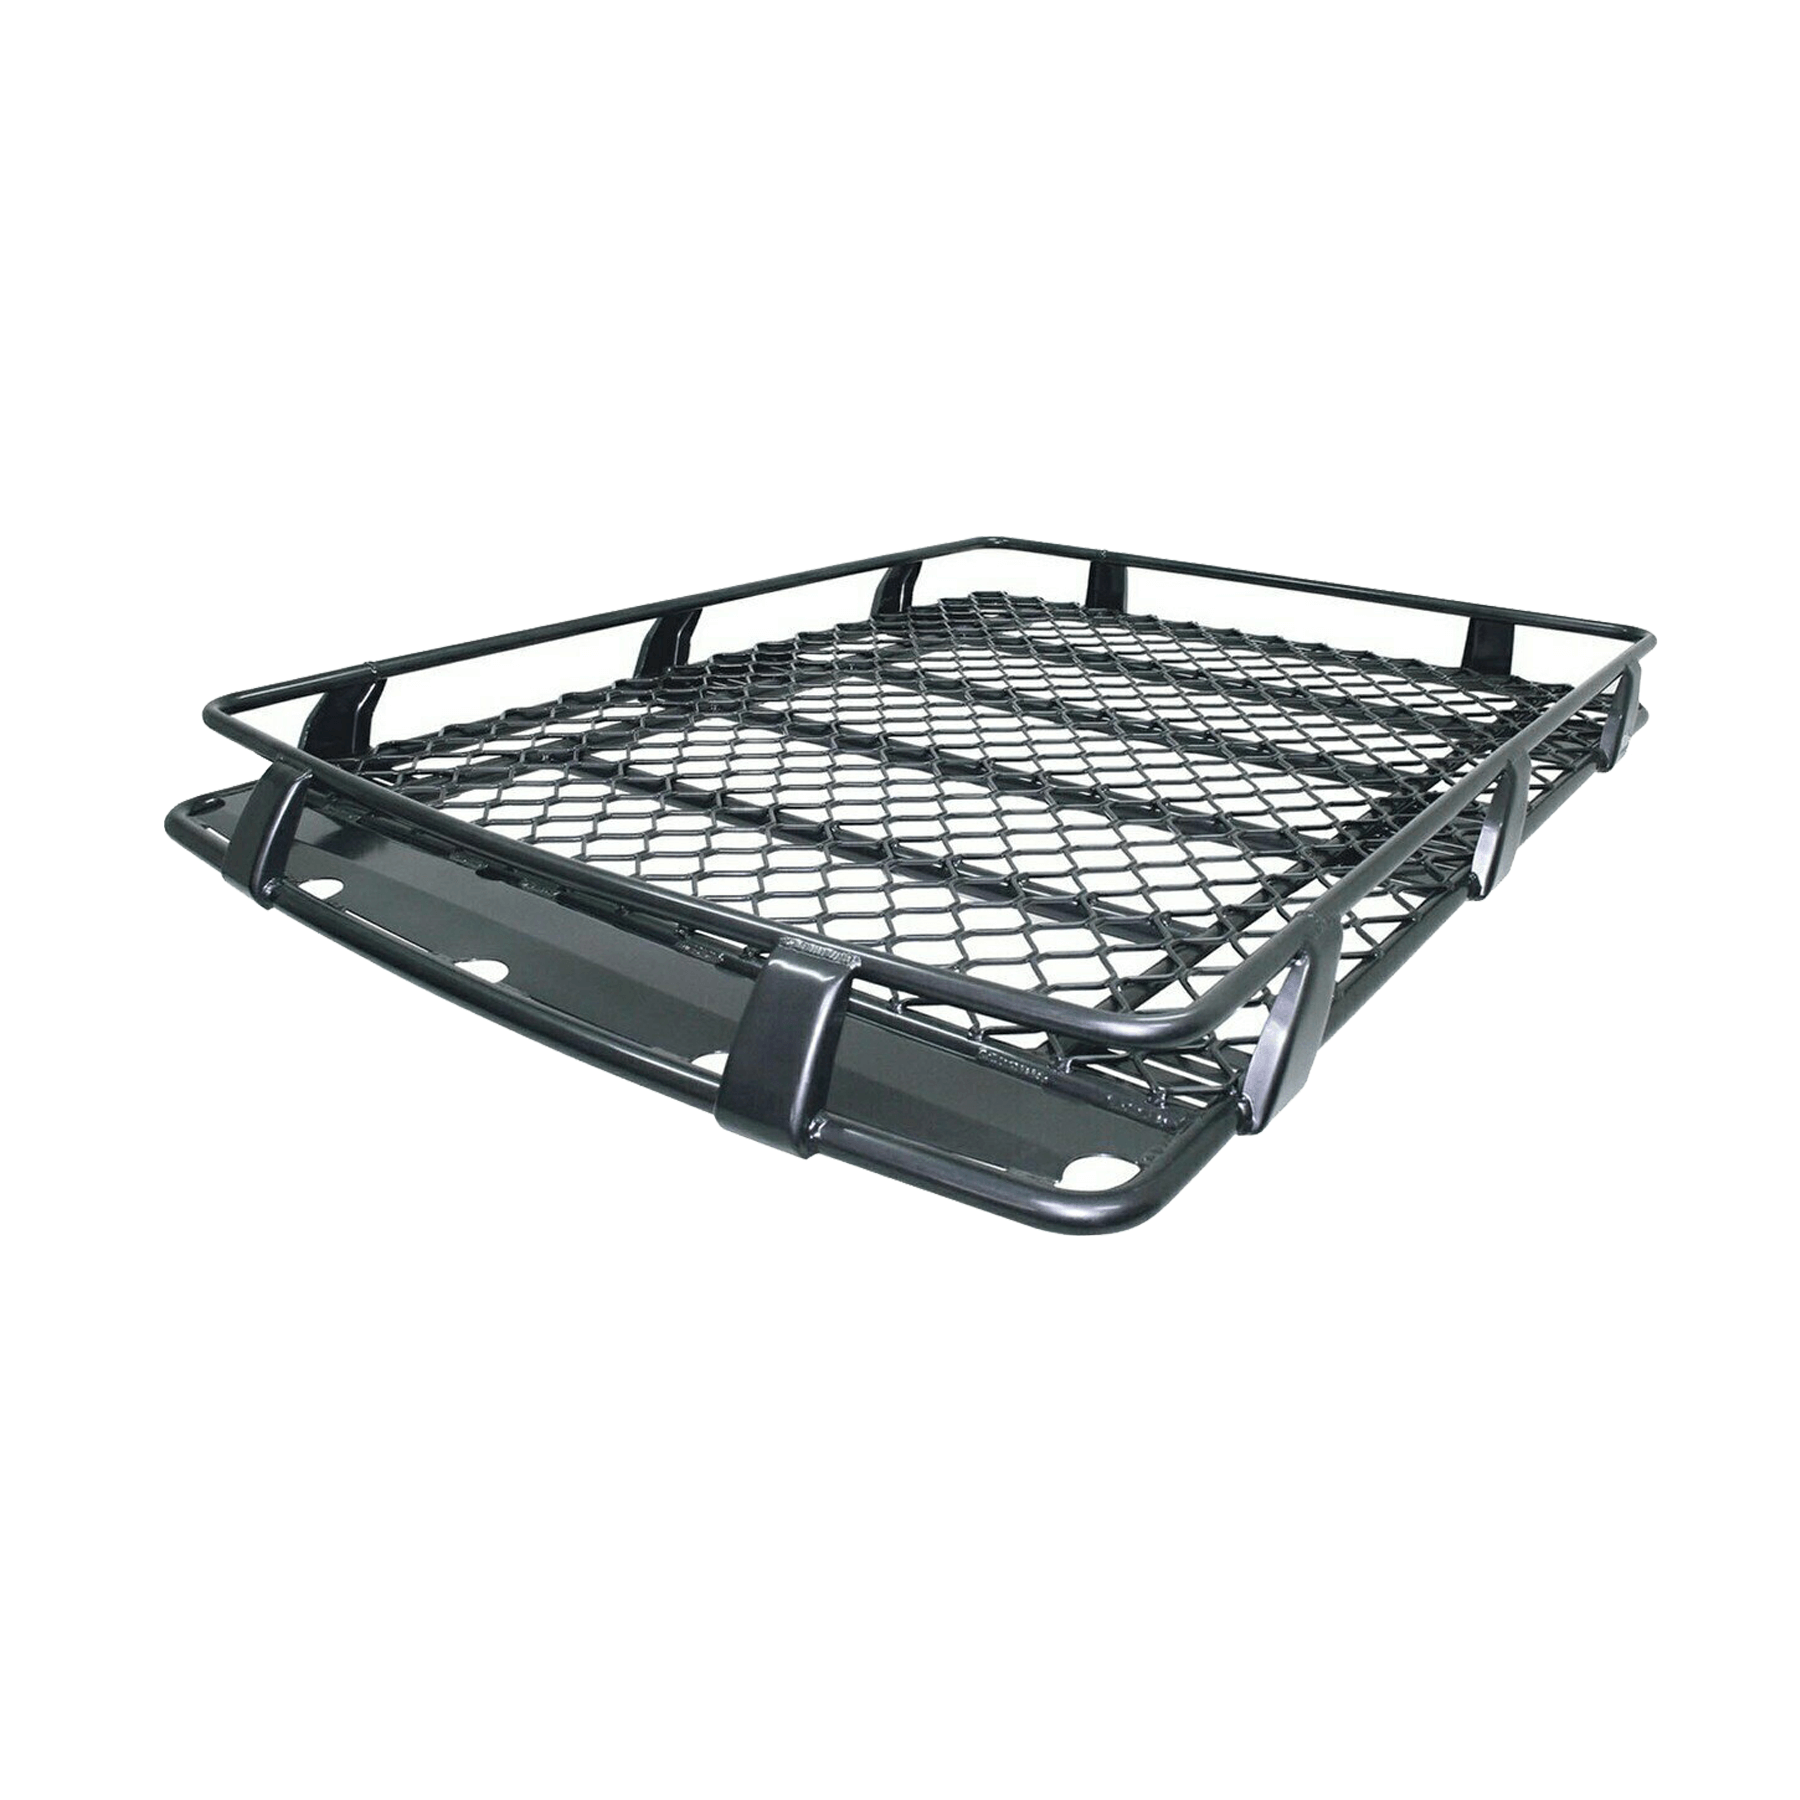 LANDCRUISER 60 SERIES 1980 to 1989 Basket Alloy Roof Rack- 1.8m x 1.25m (Open end)